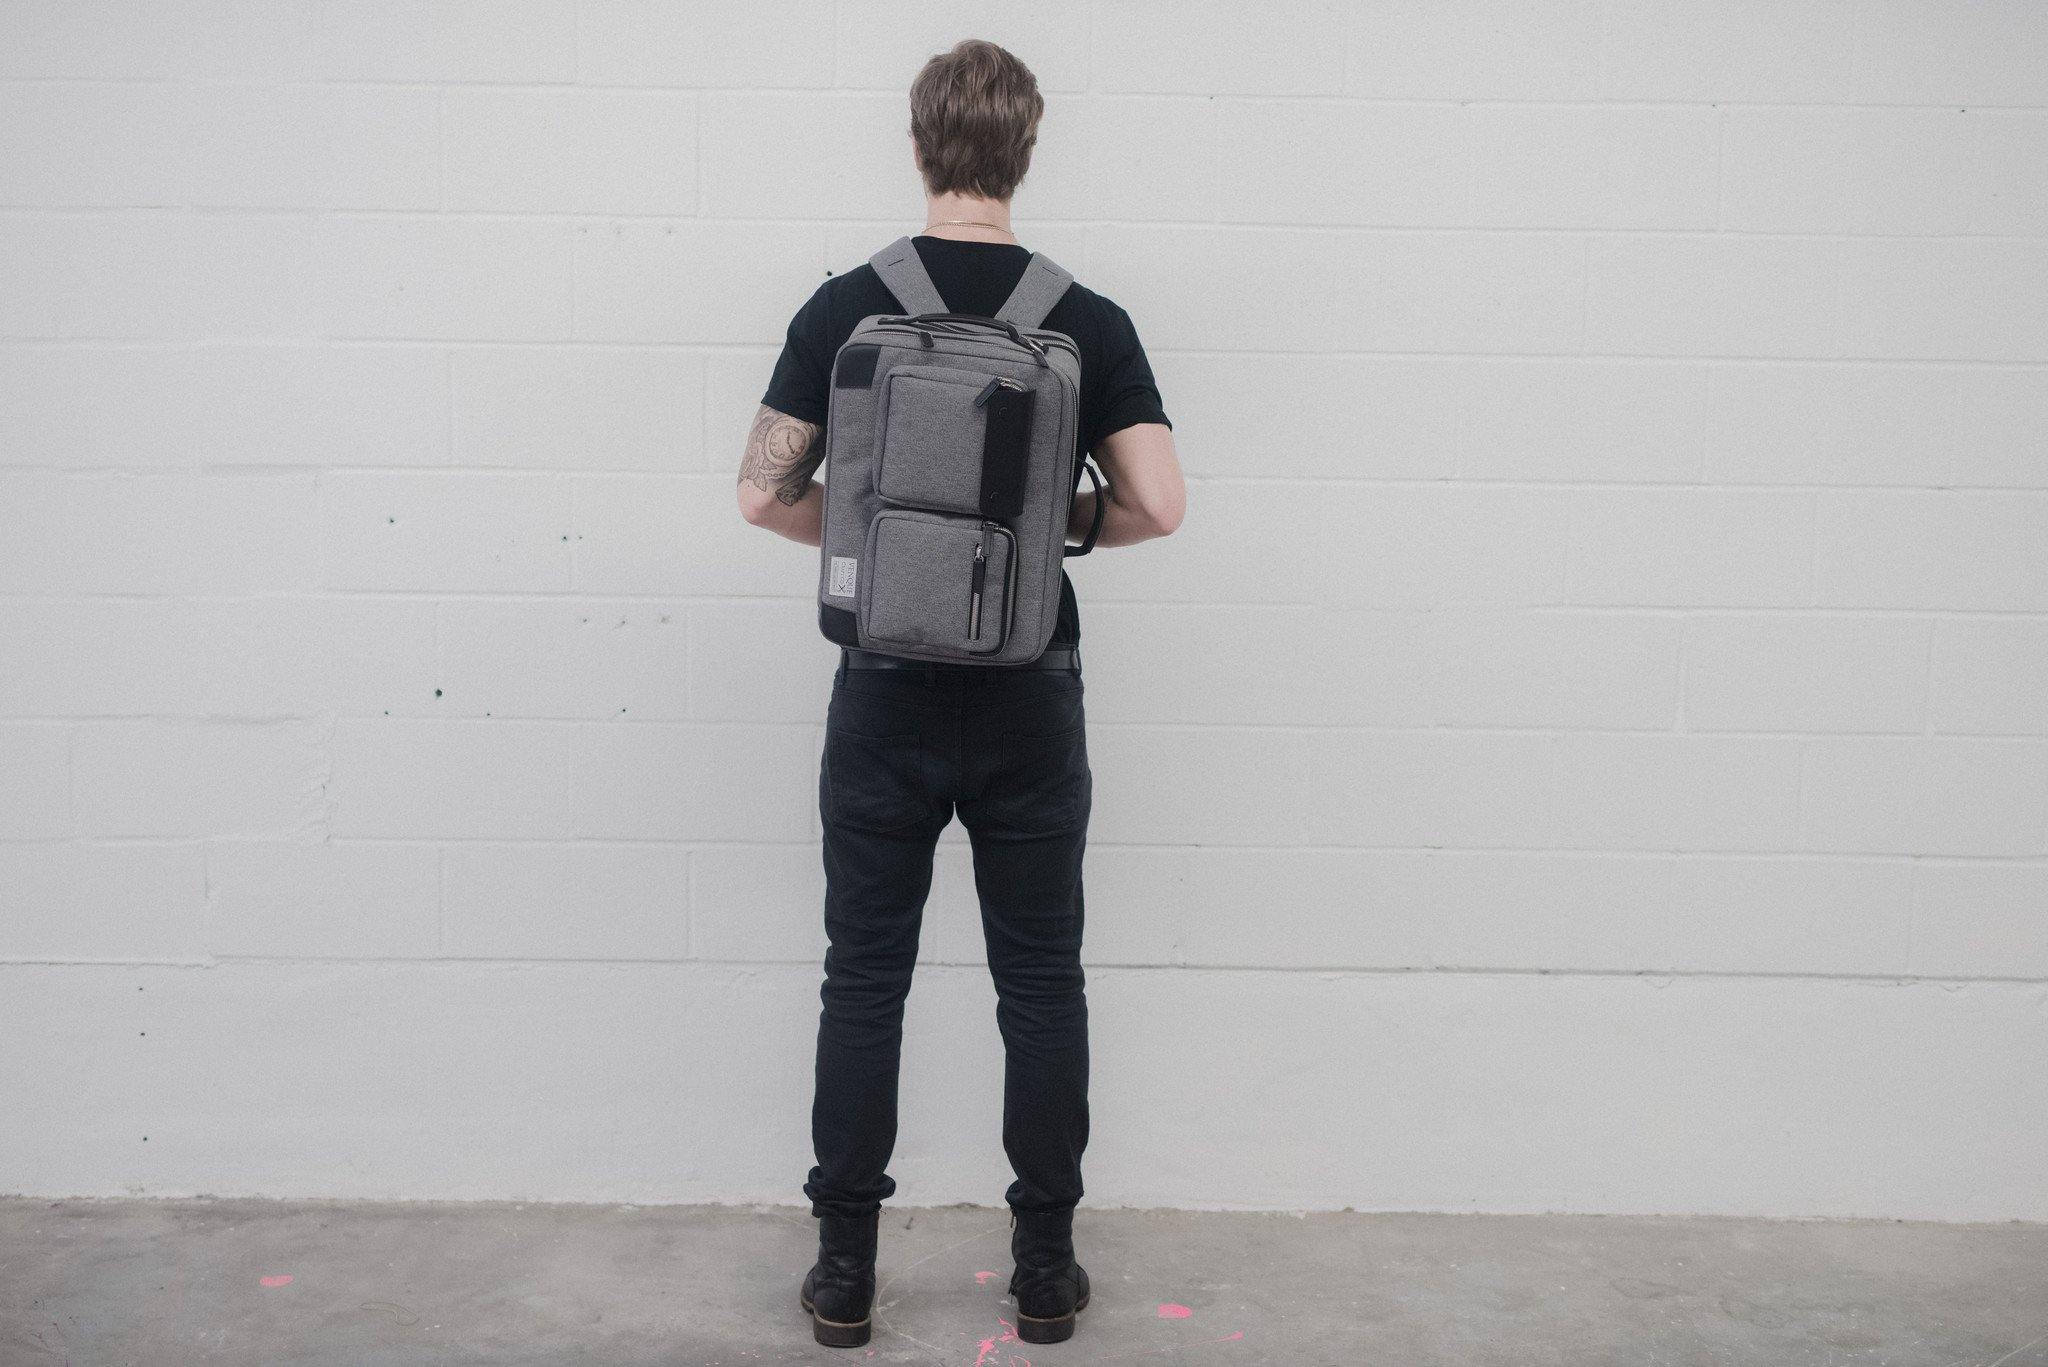 Venque Briefpack XL - Your All in One Utility Bag